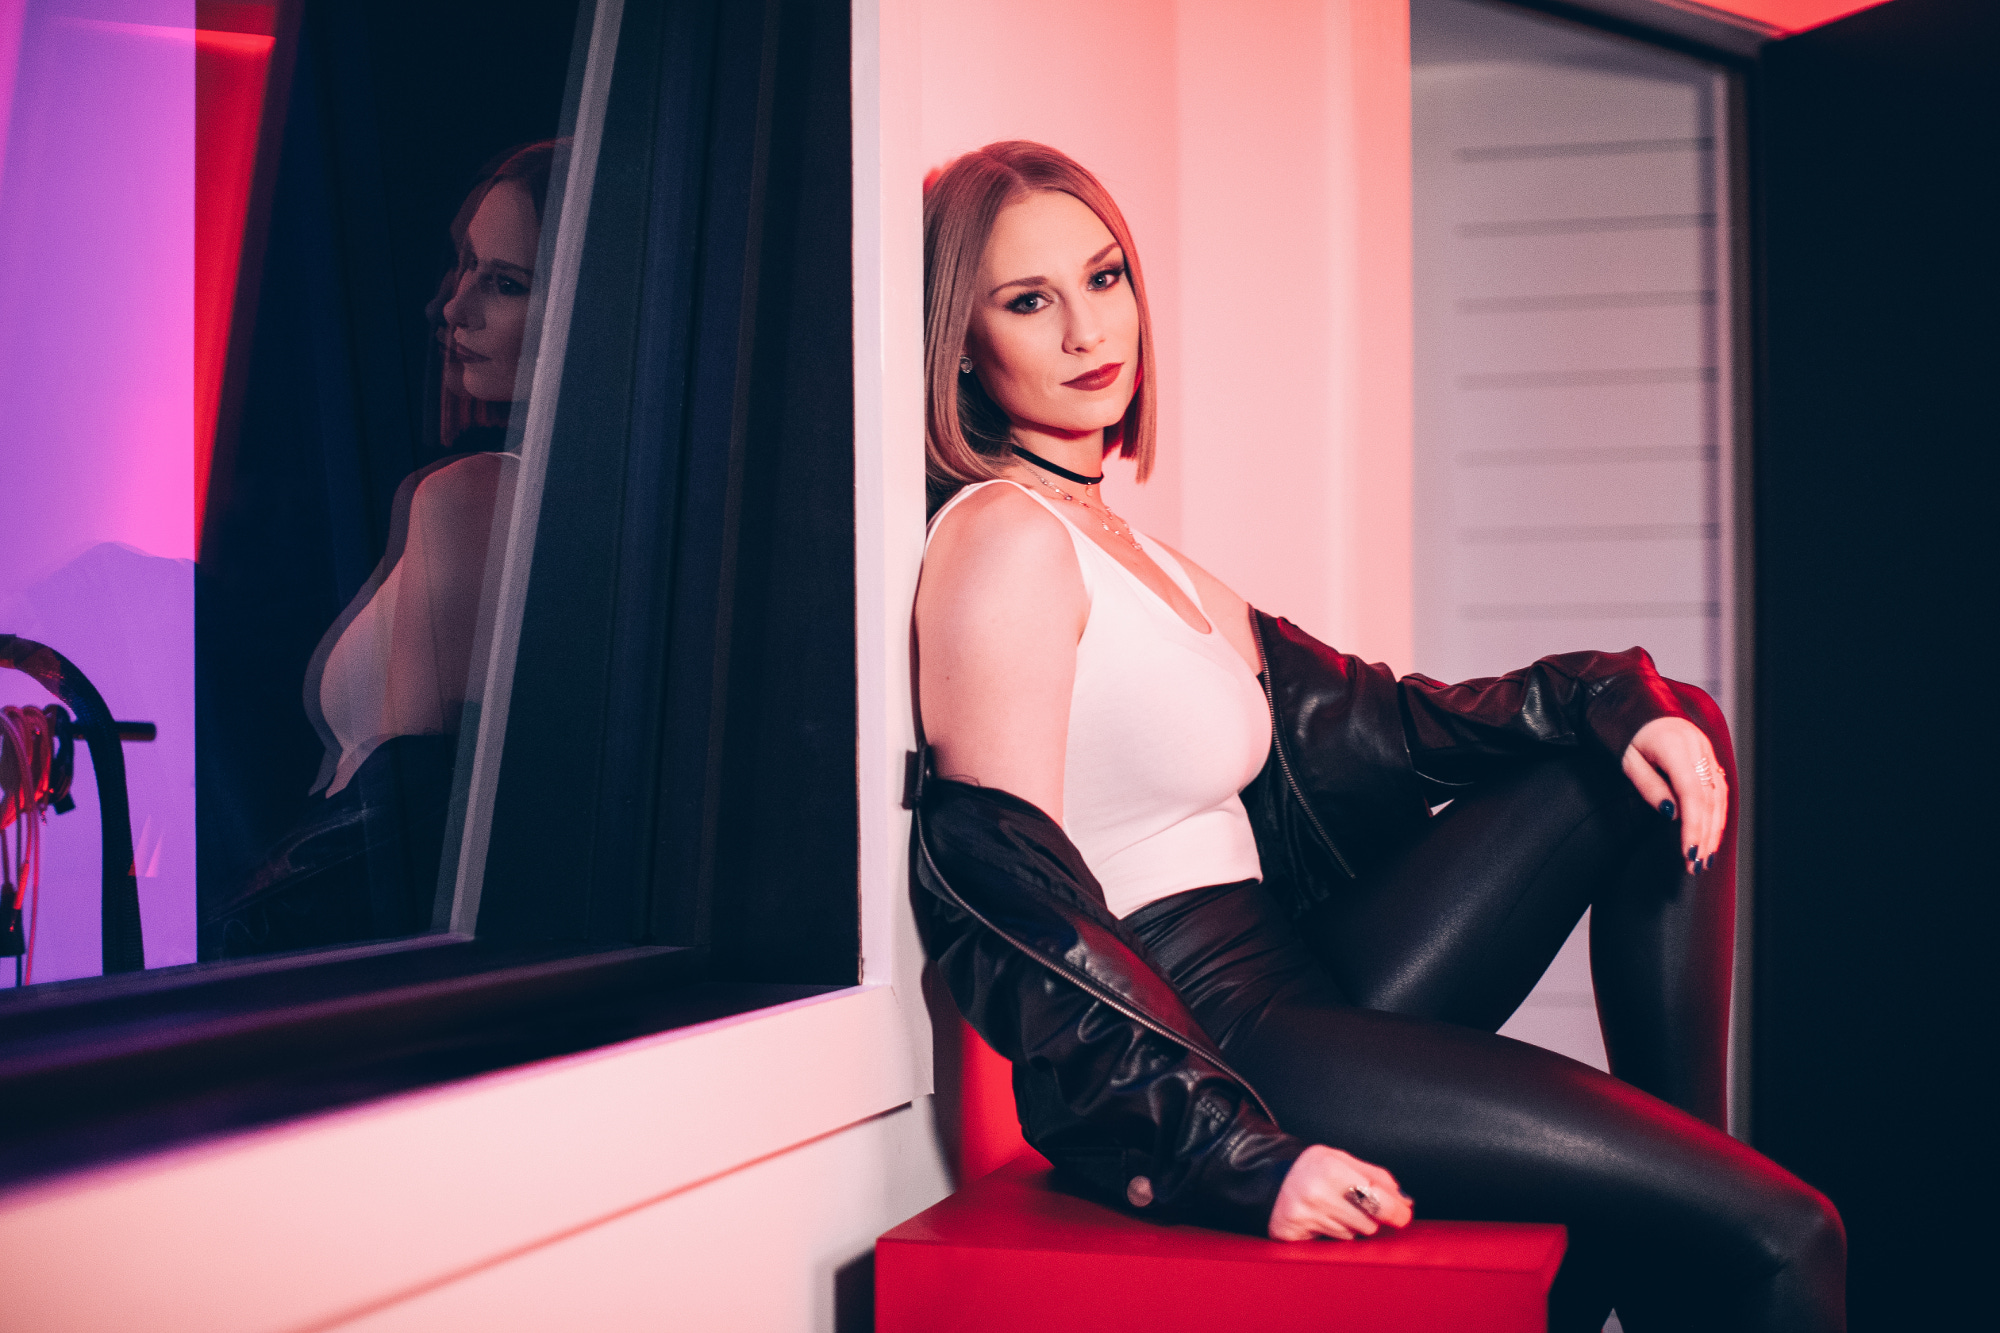 No “Psychology” Needed to Explain the Appeal of Alyssa Trahan’s New Single